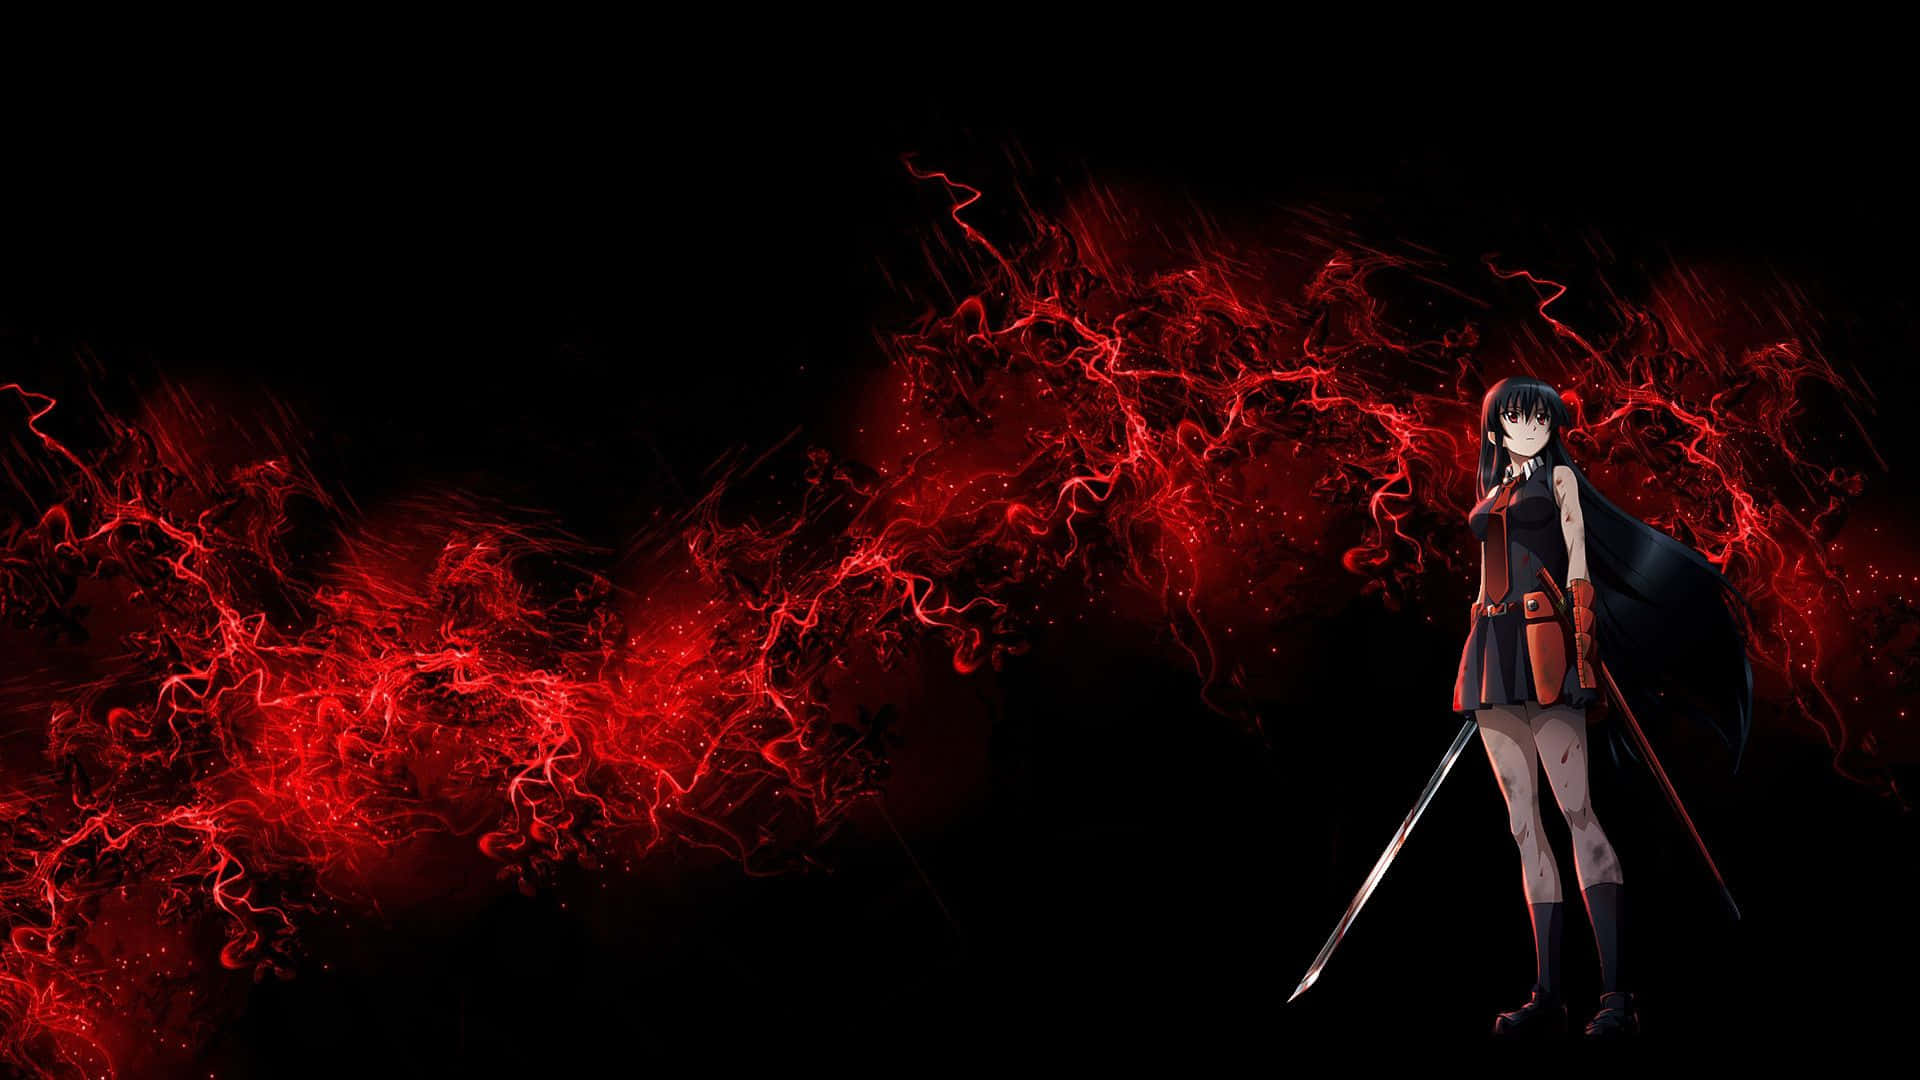 An anime character in a red and black outfit Wallpaper